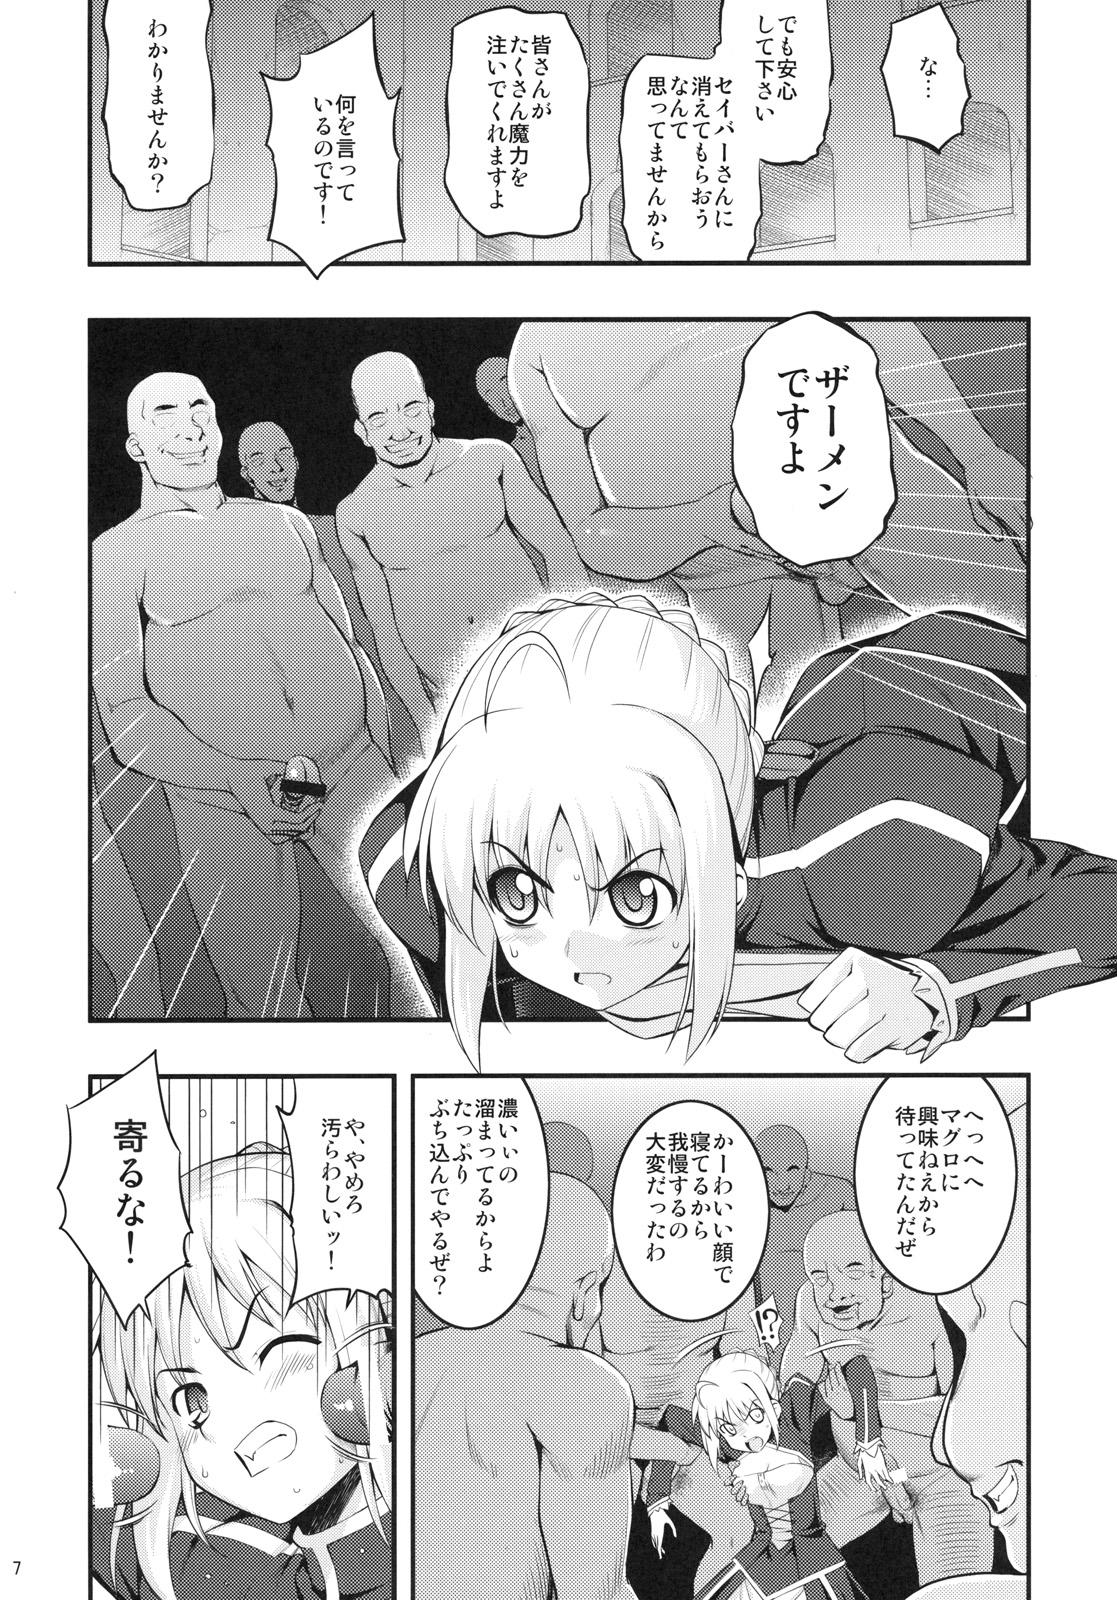 Fuck Pussy RE12 - Fate stay night Fist - Page 6